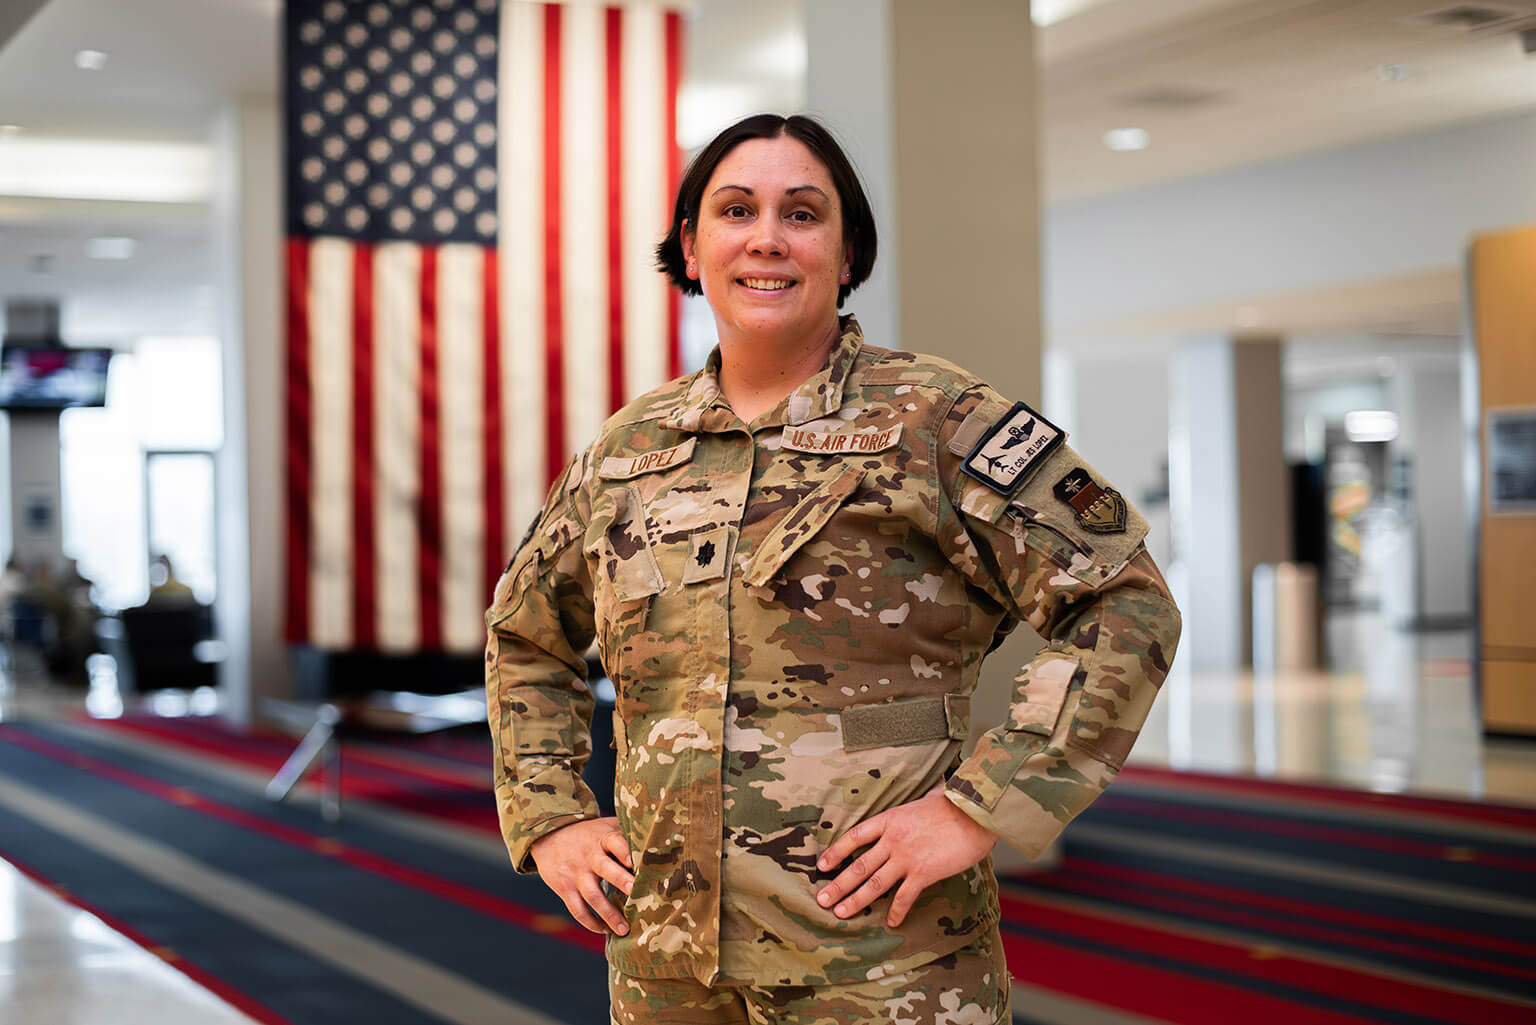 Lt. Col. Jessica Lopez, a U.S. Air Force Academy Department of English and Fine Arts assistant professor and deputy head of the Department of English and Fine Arts